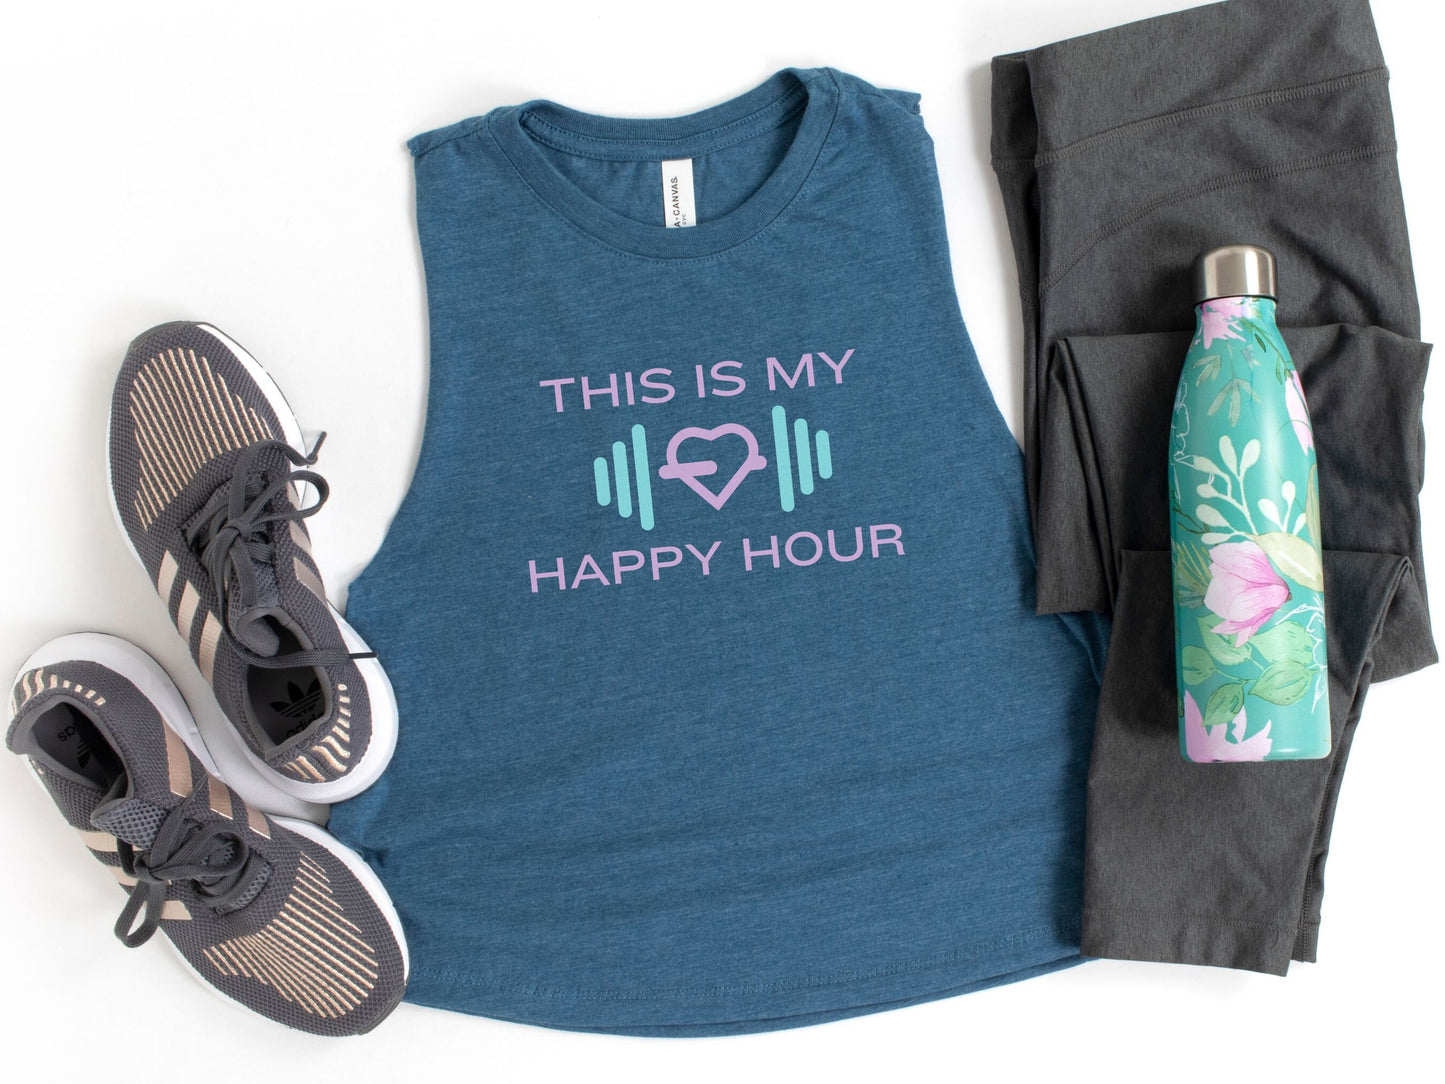 This is My Happy Hour Crop Tank Top